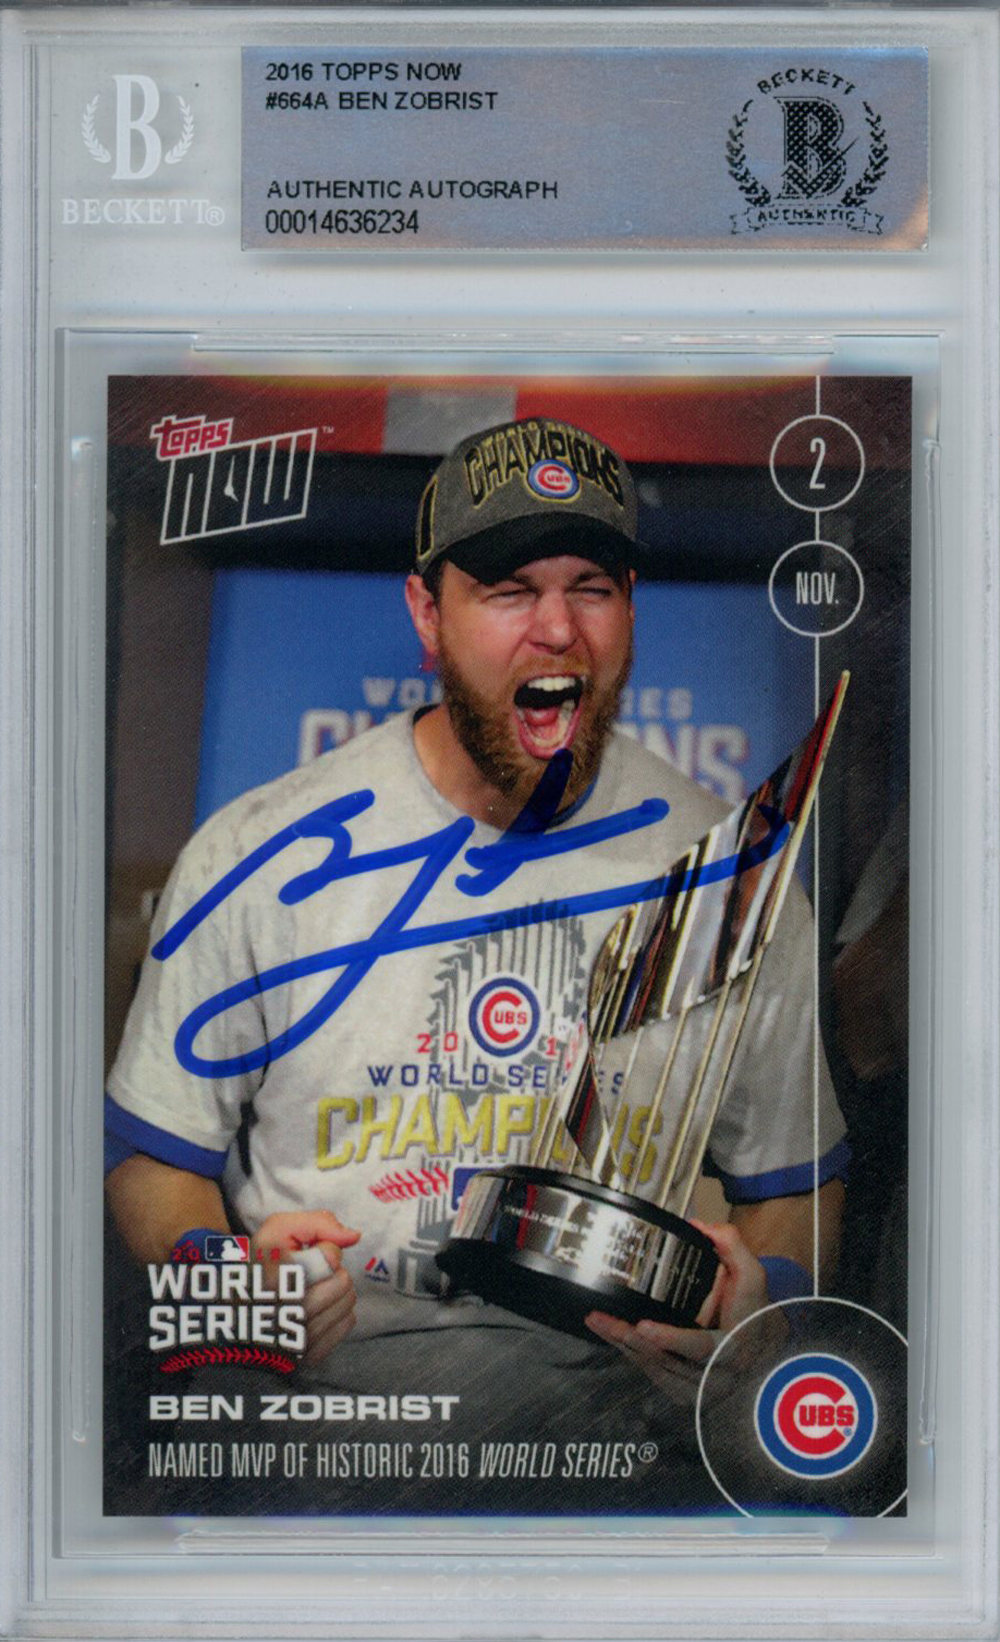 Ben Zobrist Autographed 2016 Topps Now #664A Trading Card Beckett Slab